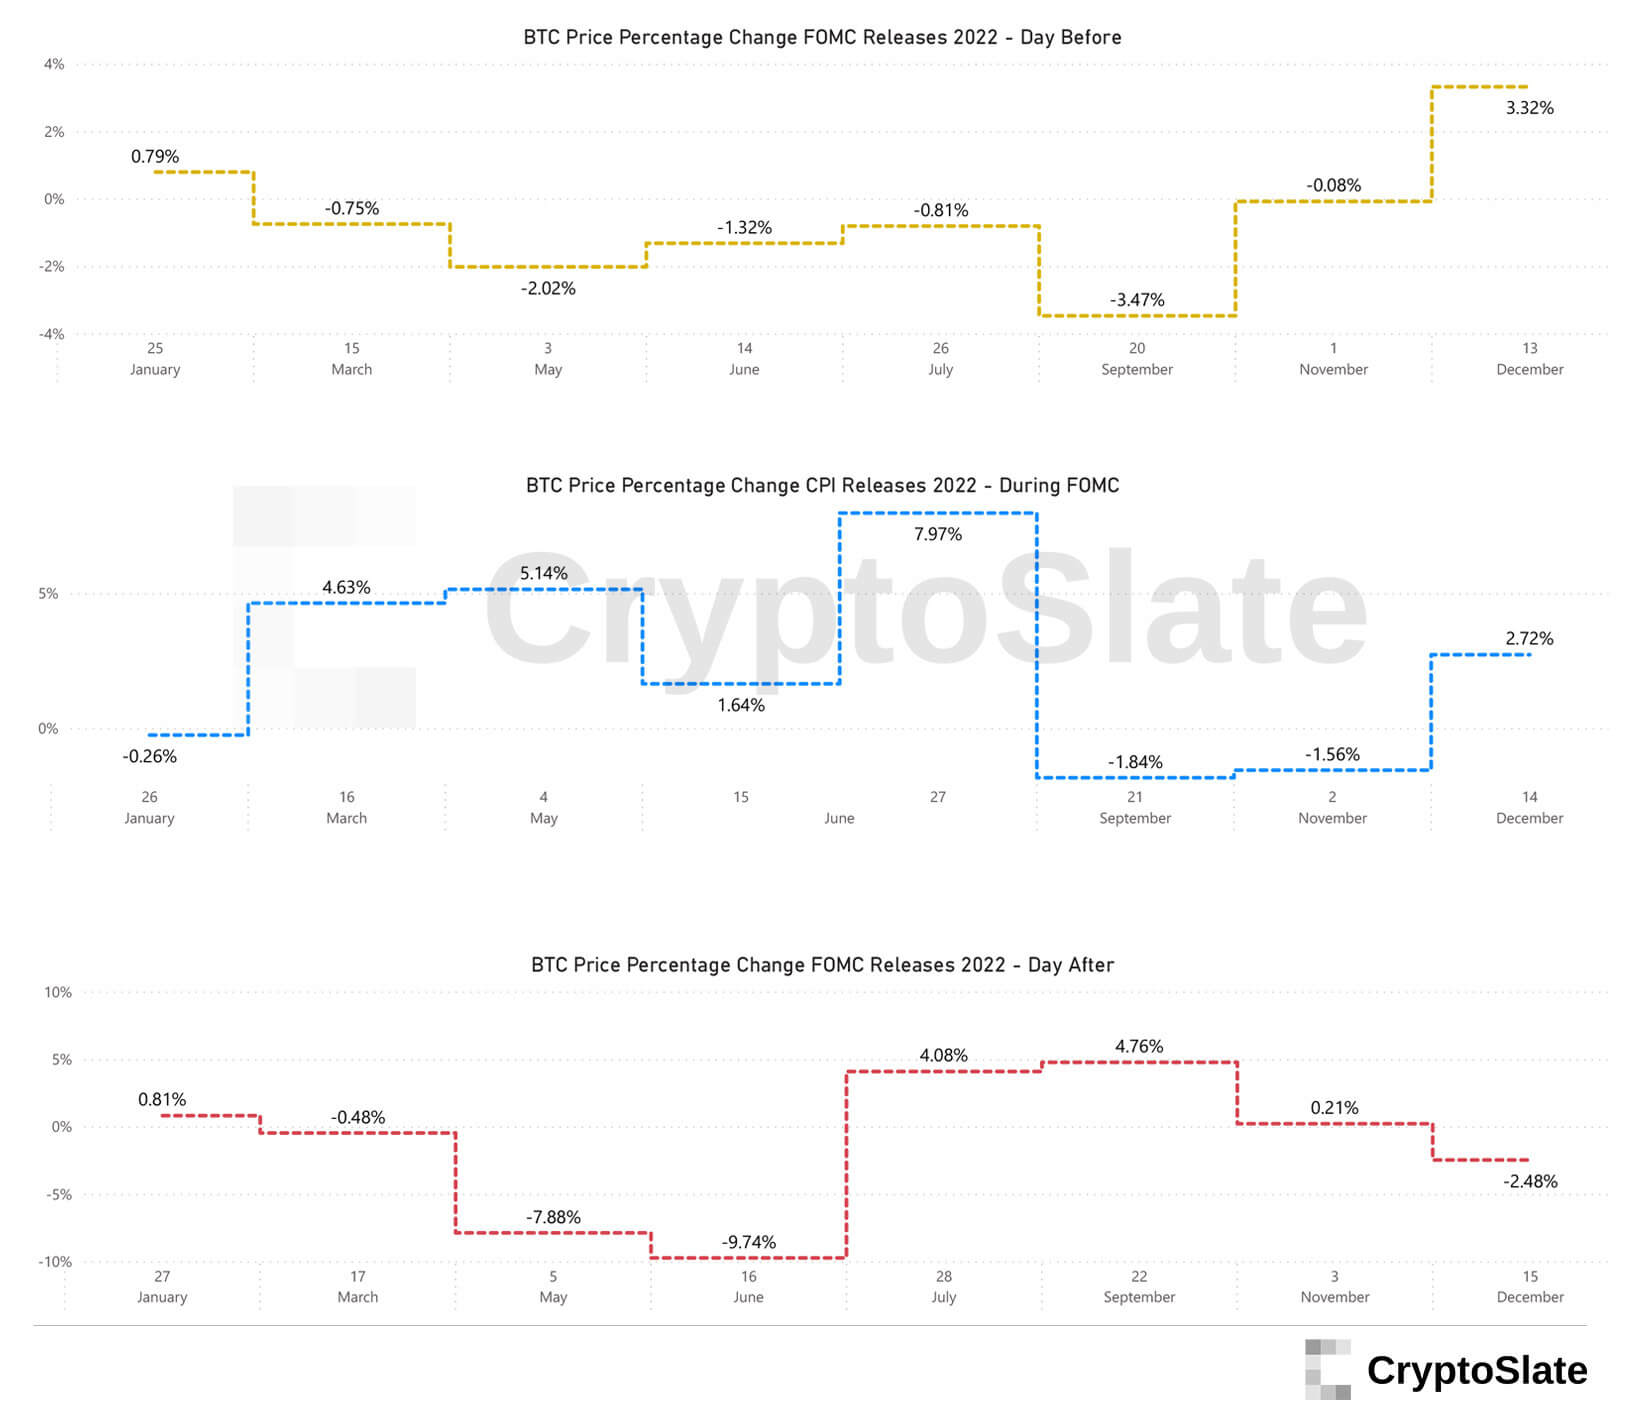 Percent change in Bitcoin before, during and after the FOMC